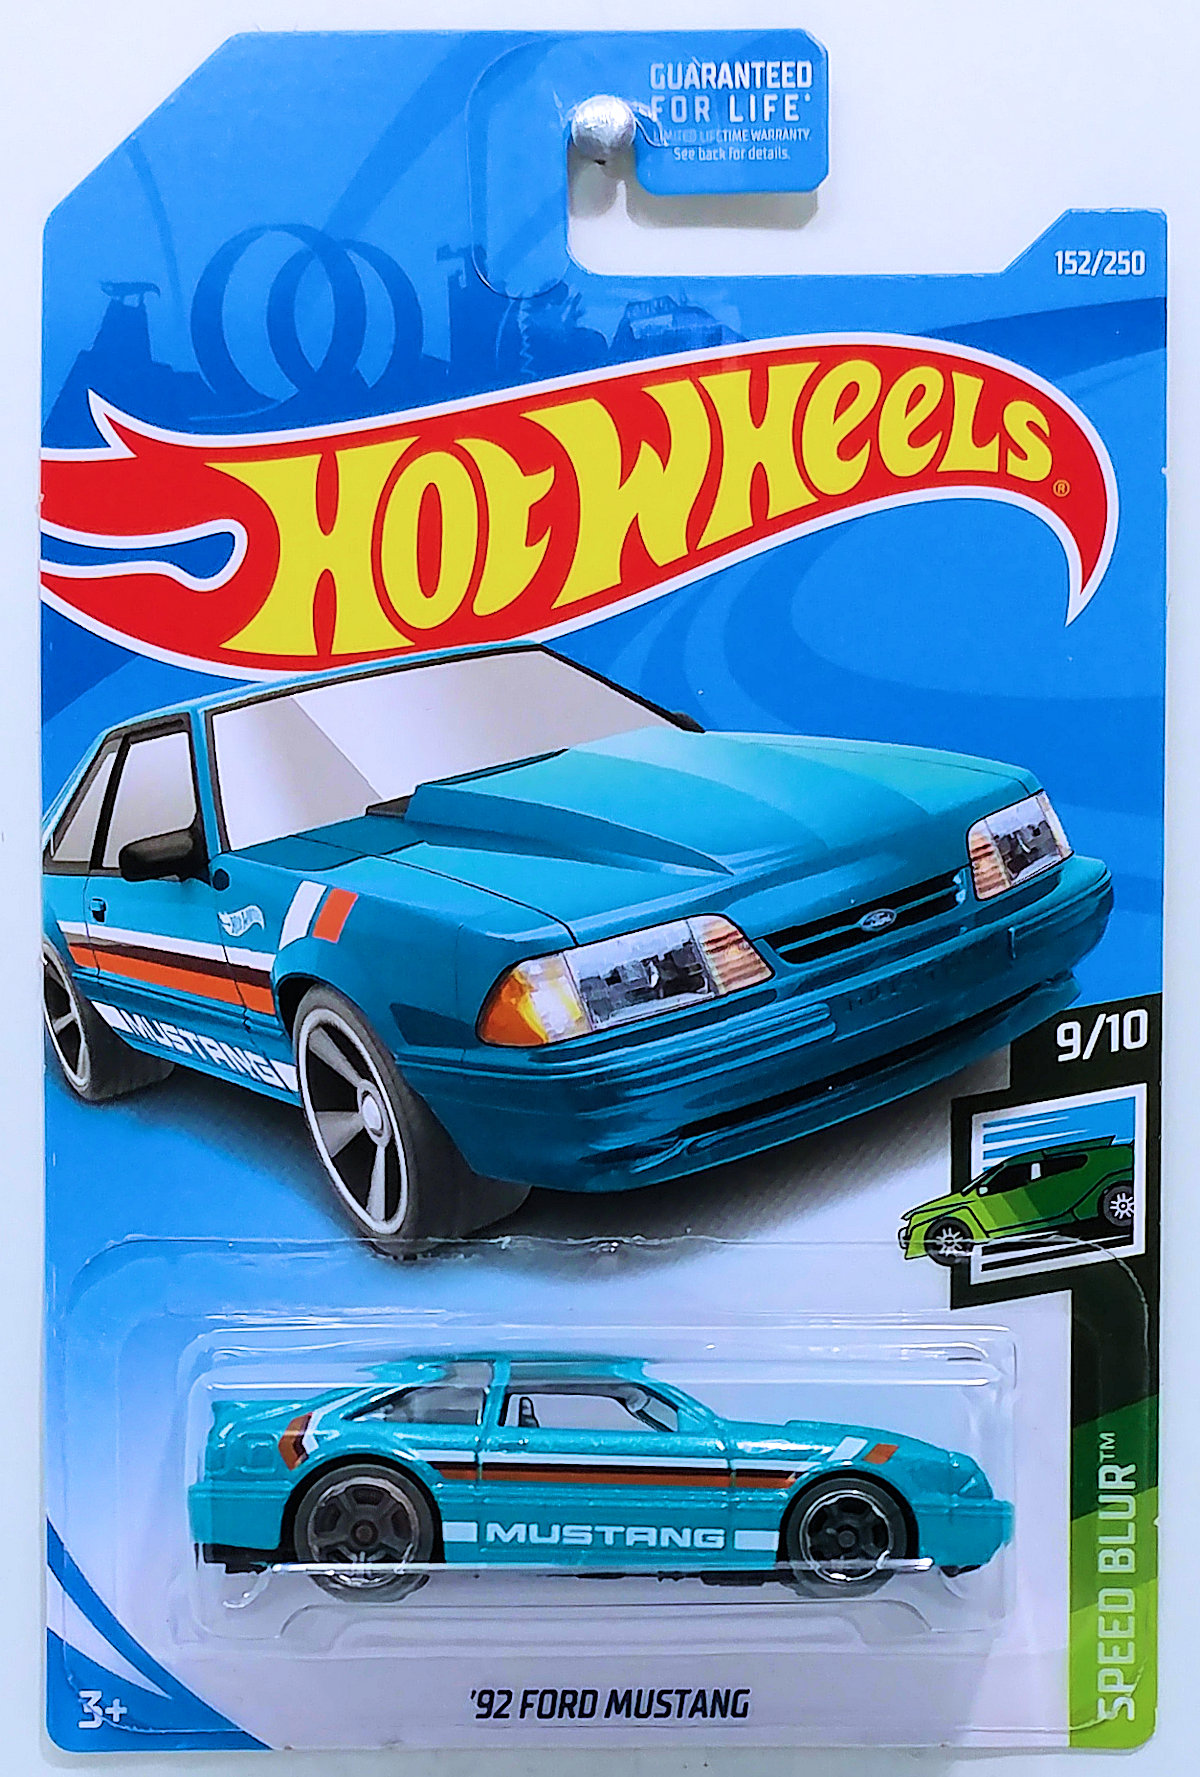 Details about   Hot wheels'92 ford mustang 2020-090 show original title np25 